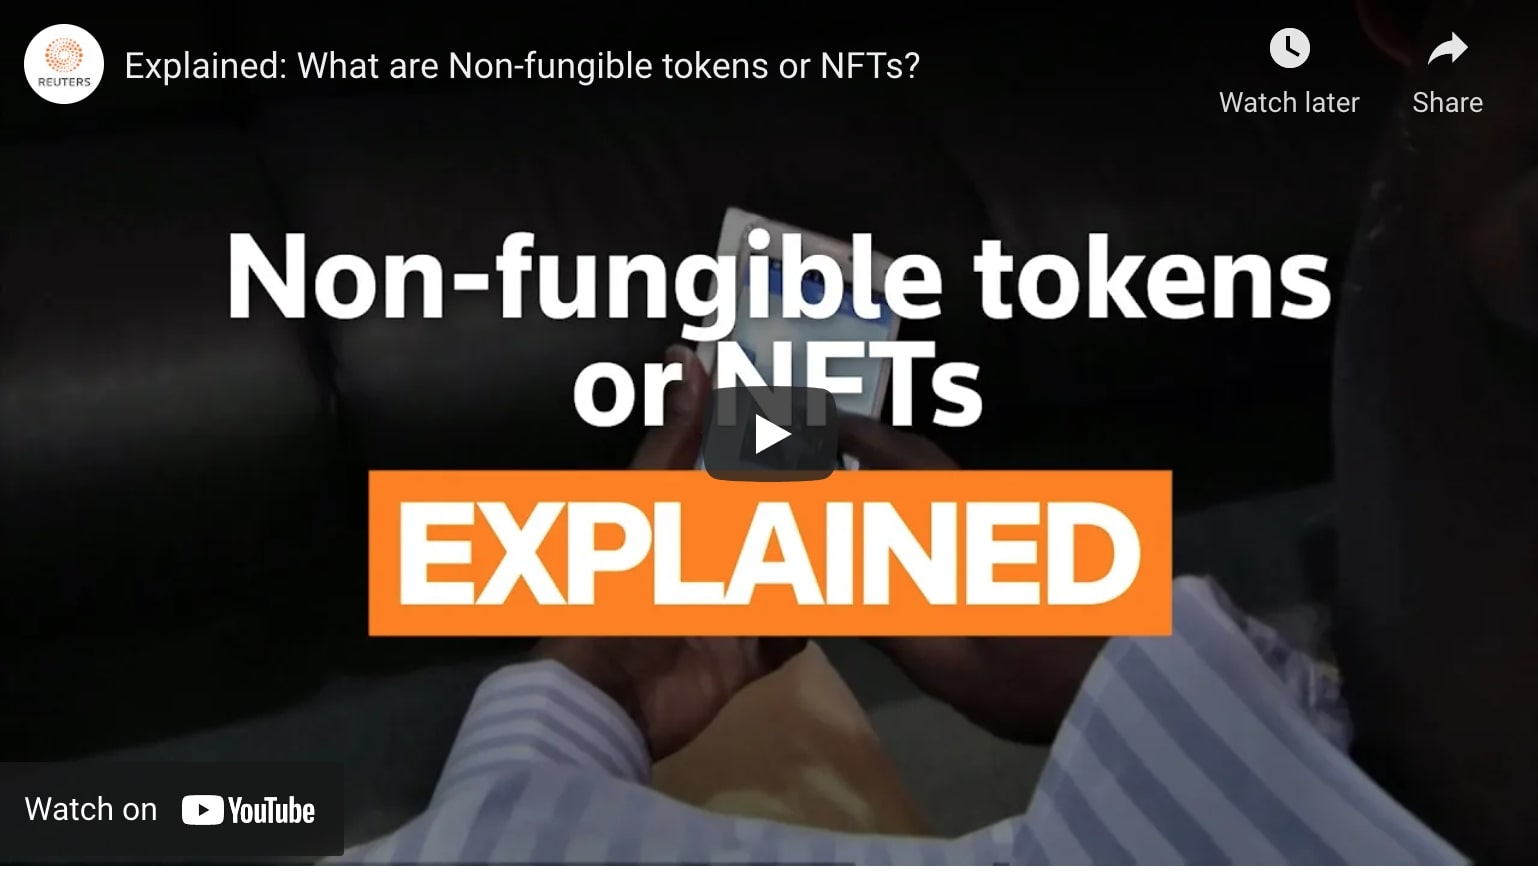 what are Non-fungible tokens or NFTs?